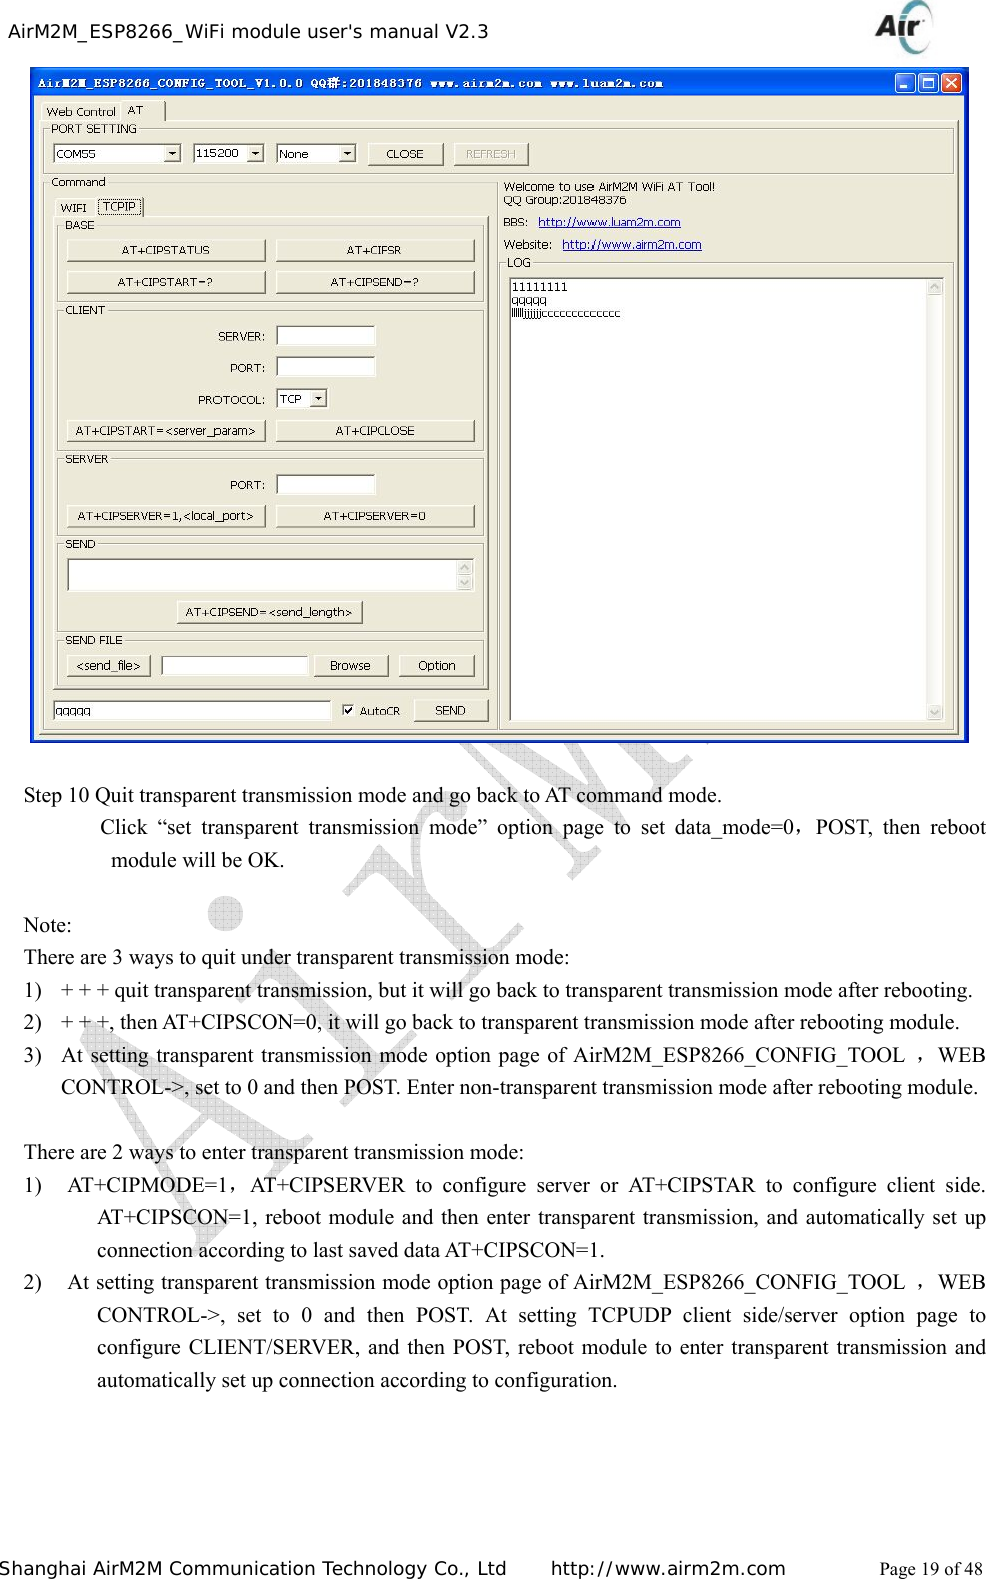    AirM2M_ESP8266_WiFi module user&apos;s manual V2.3   Shanghai AirM2M Communication Technology Co., Ltd     http://www.airm2m.com          Page 19 of 48   Step 10 Quit transparent transmission mode and go back to AT command mode.        Click “set transparent transmission mode” option page to set data_mode=0，POST, then reboot module will be OK.  Note: There are 3 ways to quit under transparent transmission mode: 1) + + + quit transparent transmission, but it will go back to transparent transmission mode after rebooting. 2) + + +, then AT+CIPSCON=0, it will go back to transparent transmission mode after rebooting module. 3) At setting transparent transmission mode option page of AirM2M_ESP8266_CONFIG_TOOL  ，WEB CONTROL-&gt;, set to 0 and then POST. Enter non-transparent transmission mode after rebooting module.  There are 2 ways to enter transparent transmission mode: 1) AT+CIPMODE=1，AT+CIPSERVER to configure server or AT+CIPSTAR to configure client side. AT+CIPSCON=1, reboot module and then enter transparent transmission, and automatically set up connection according to last saved data AT+CIPSCON=1. 2) At setting transparent transmission mode option page of AirM2M_ESP8266_CONFIG_TOOL  ，WEB CONTROL-&gt;, set to 0 and then POST. At setting TCPUDP client side/server option page to configure CLIENT/SERVER, and then POST, reboot module to enter transparent transmission and automatically set up connection according to configuration.       